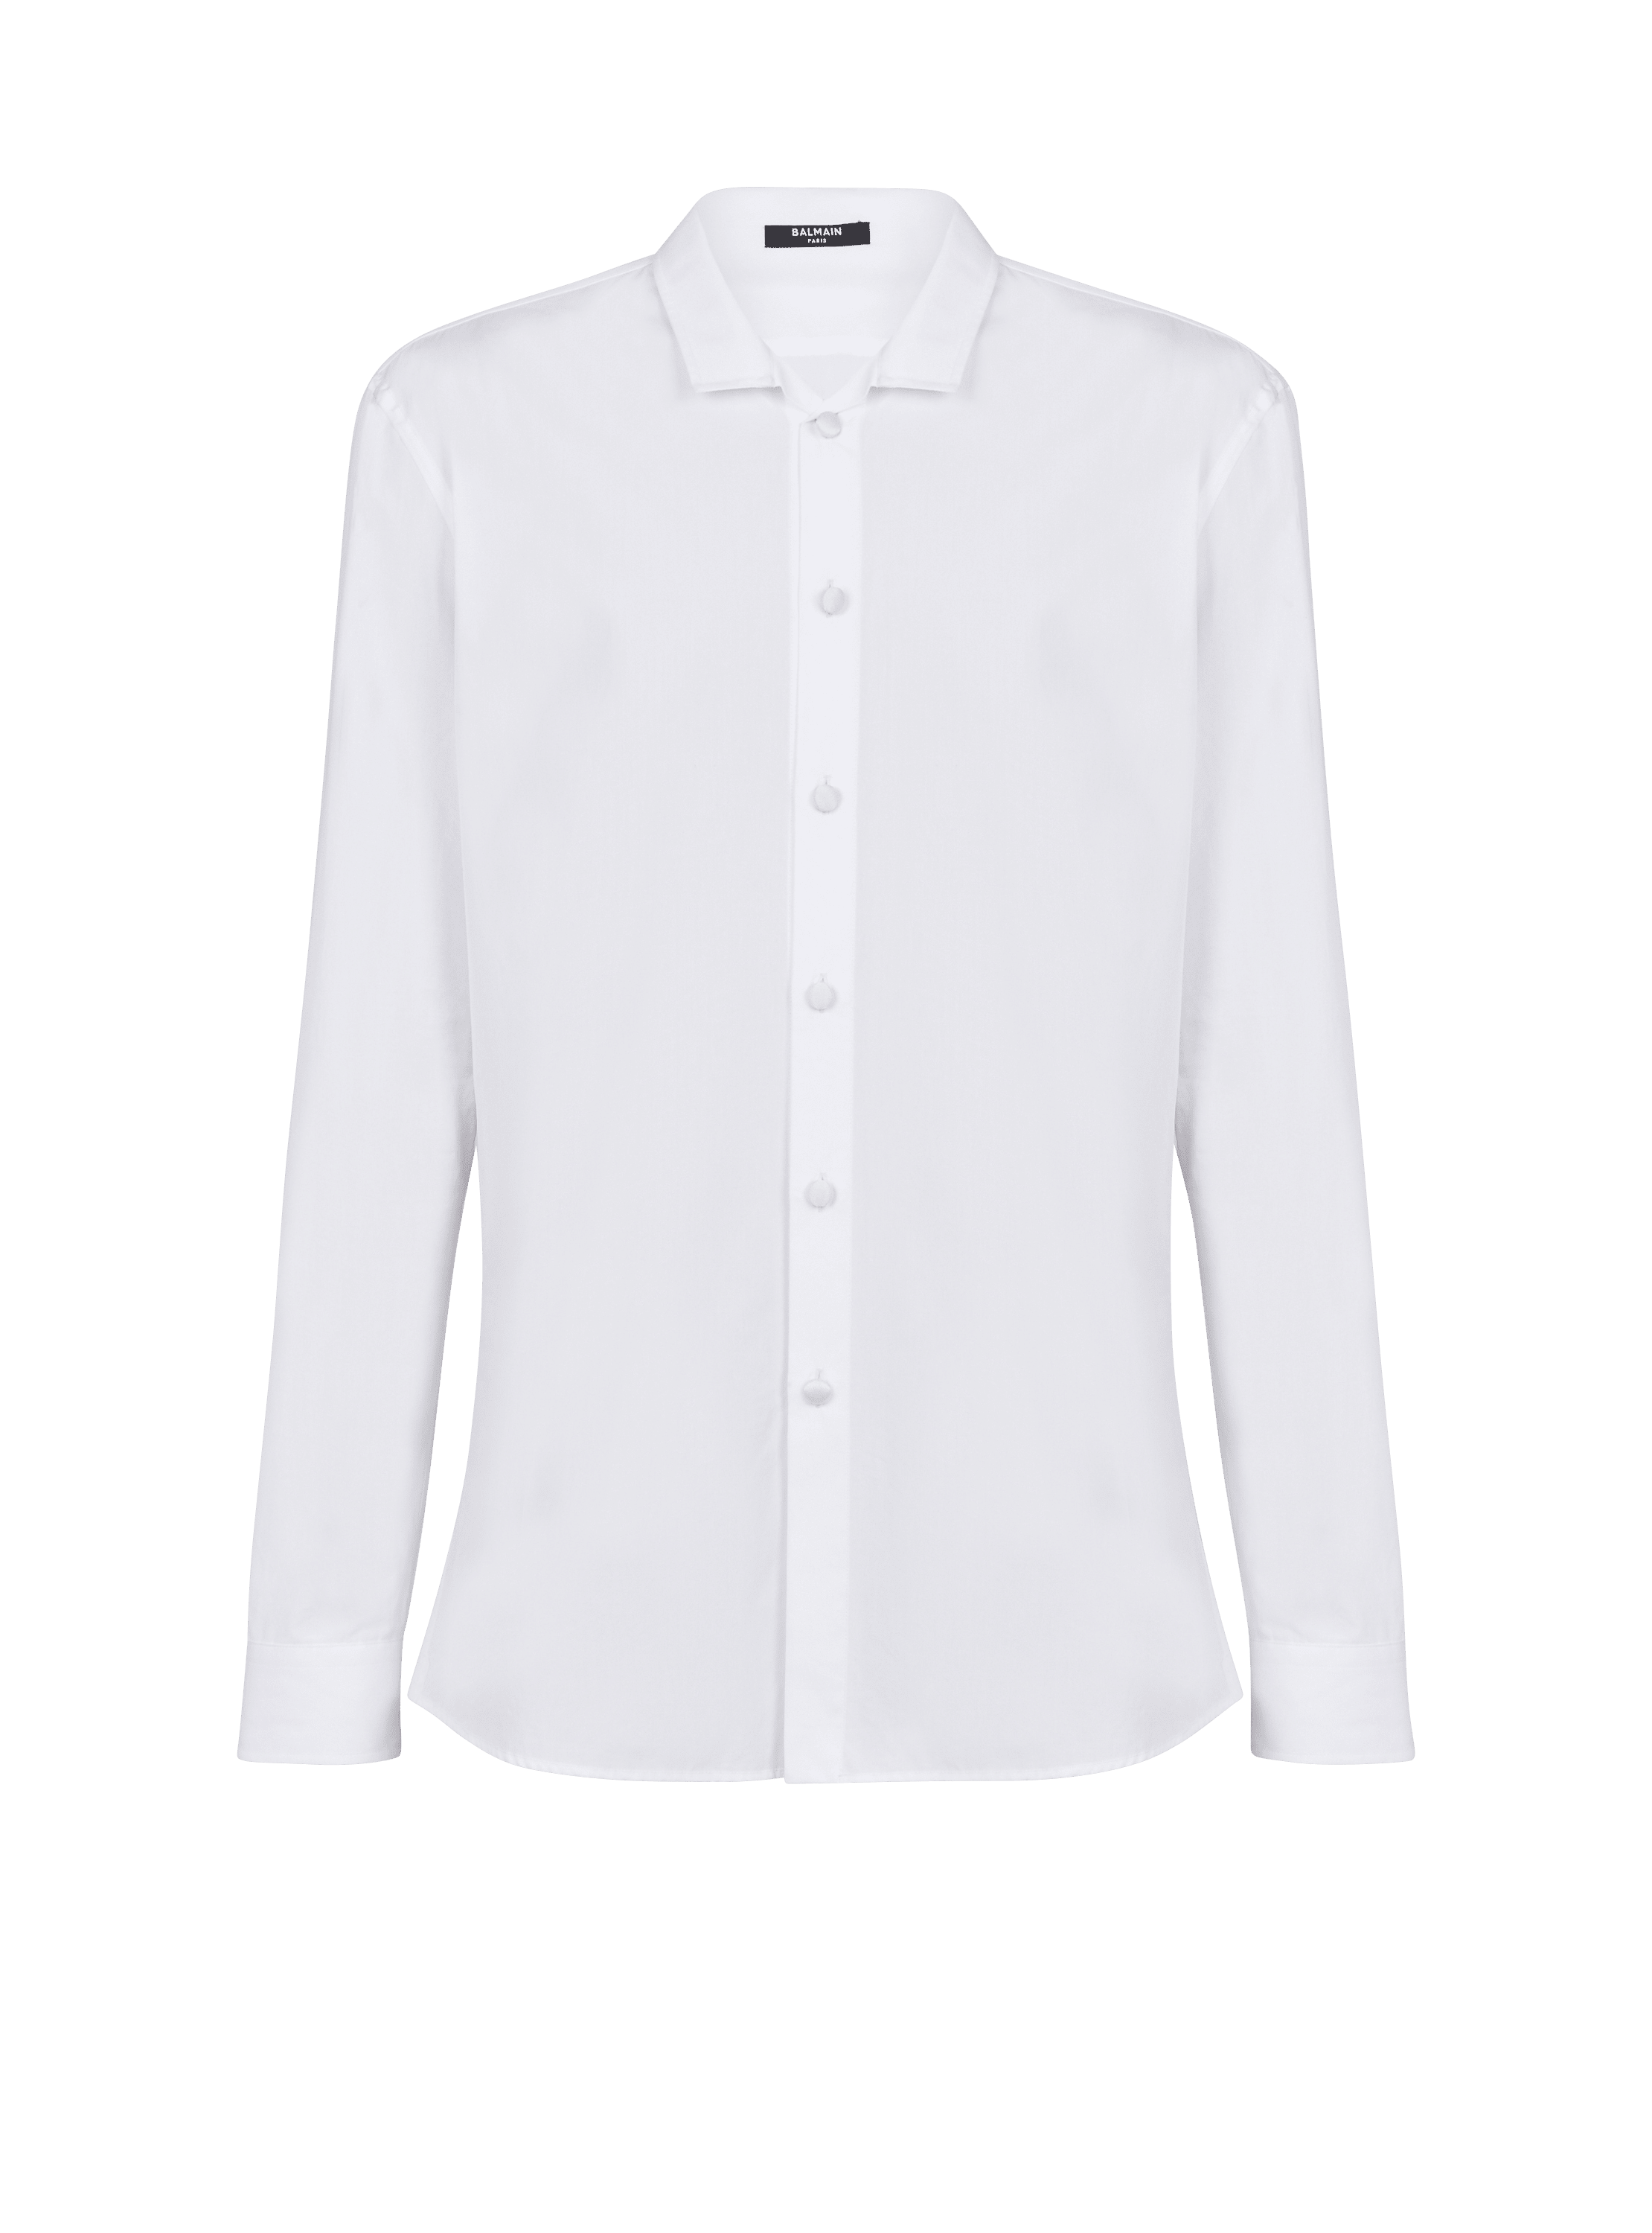 Cotton shirt with satin-covered buttons, white, hi-res